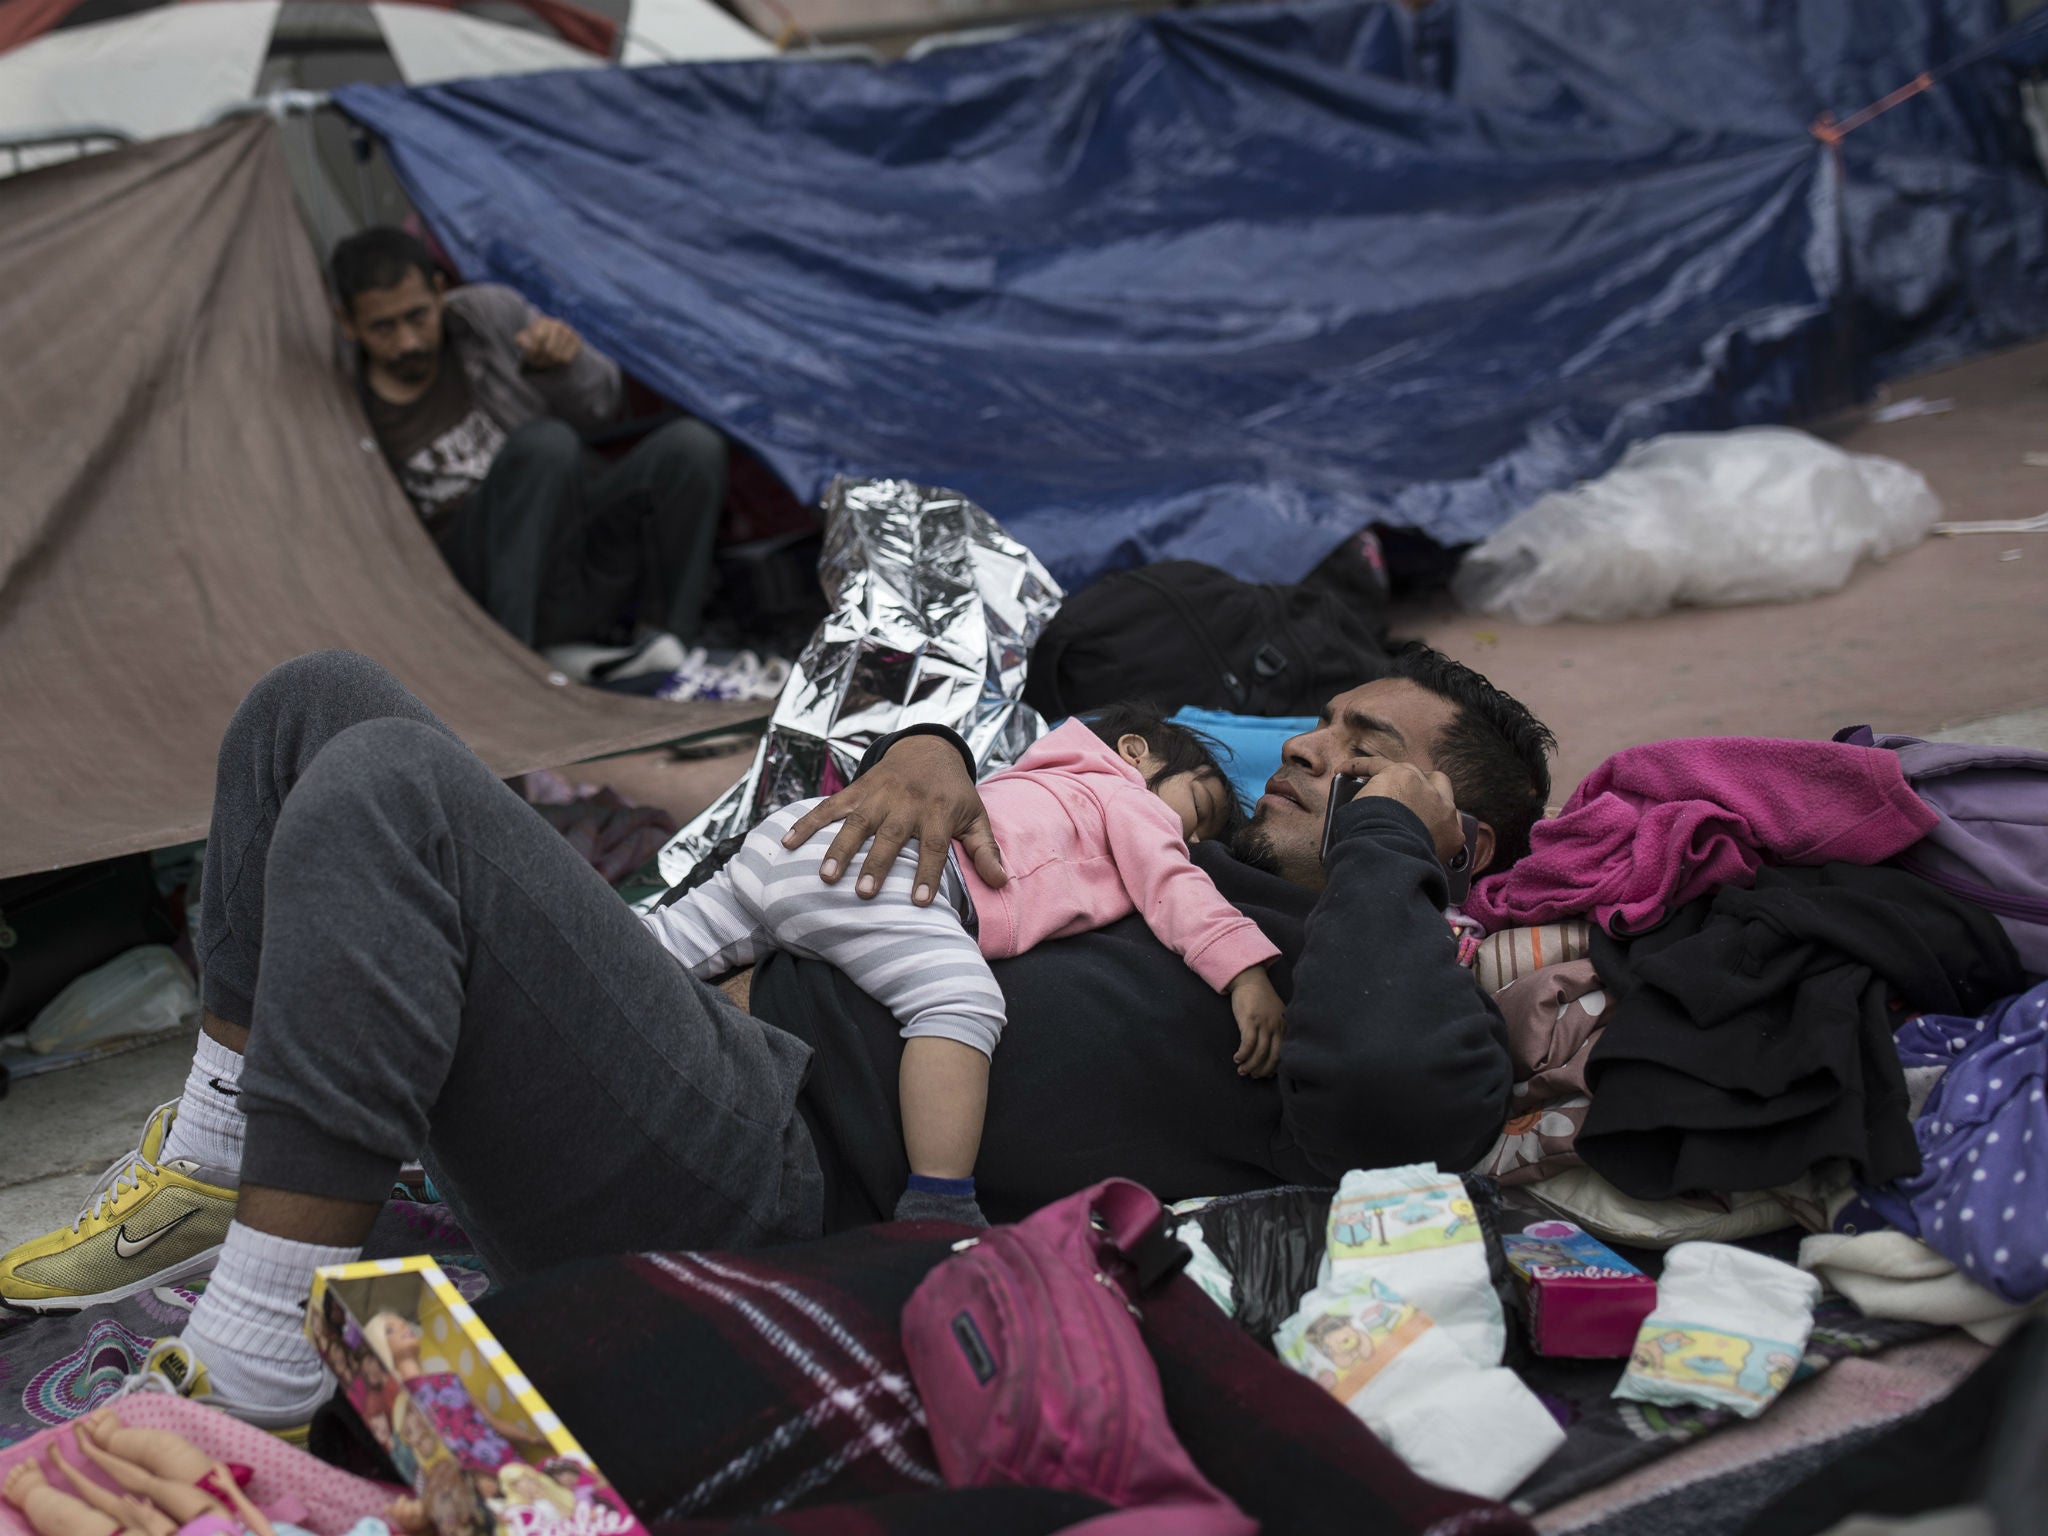 A migrant father and child rest where they set up camp to wait for access to request asylum in the US at the US-Mexico border in Tijuana, Mexico